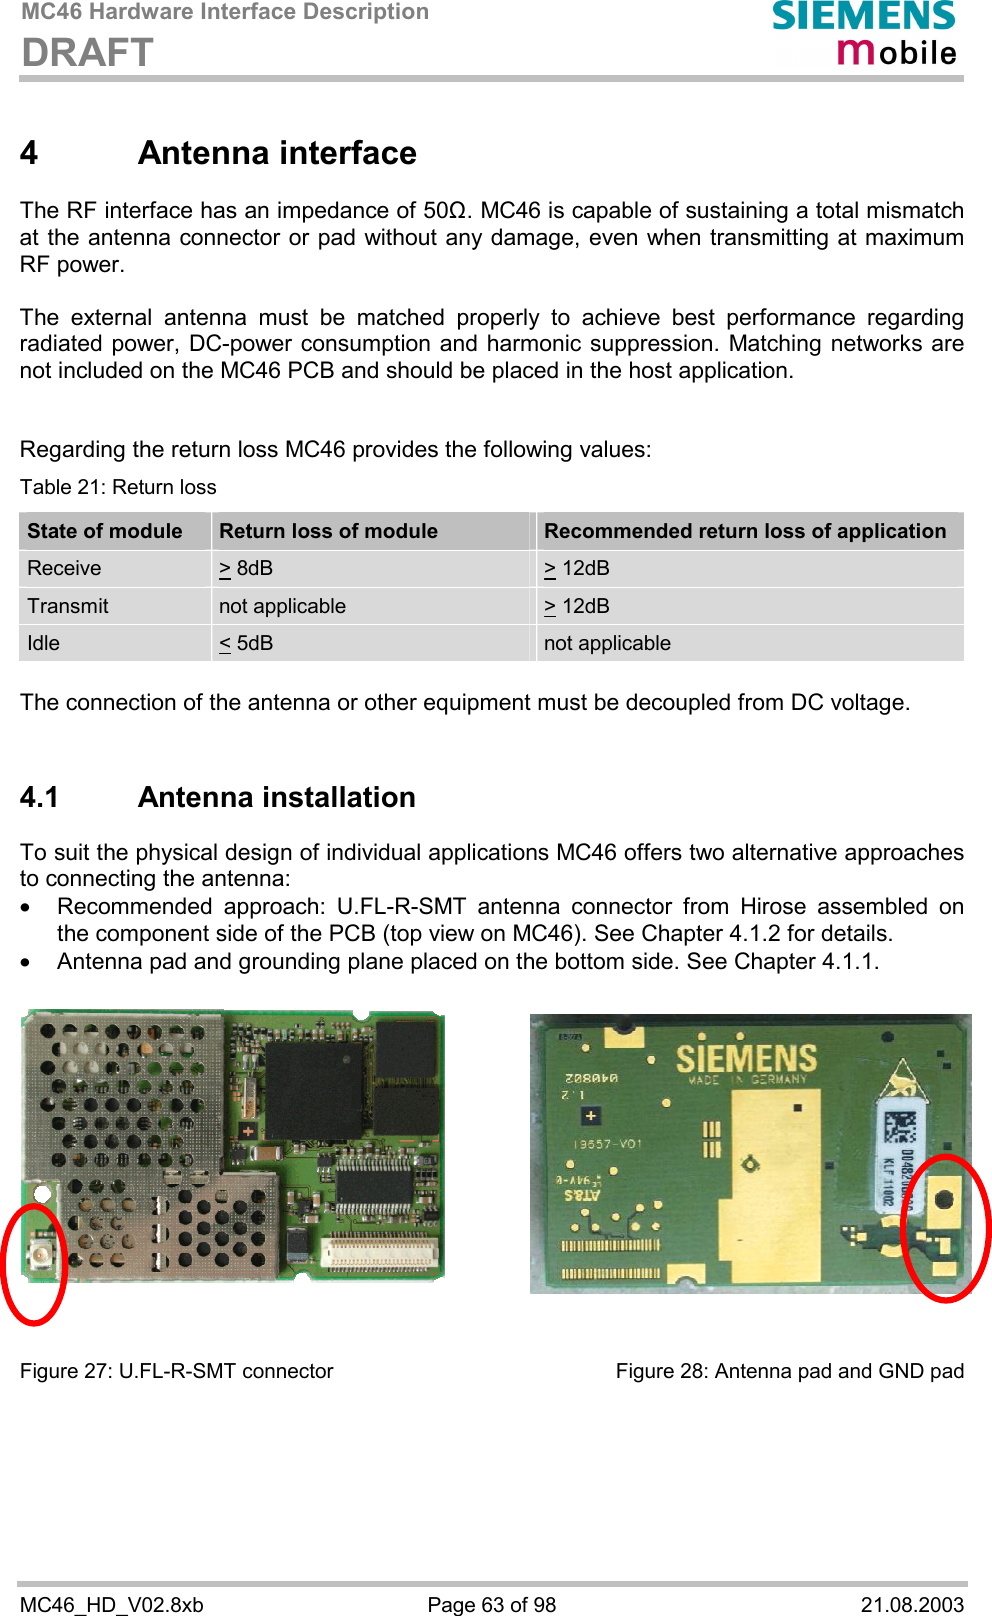 MC46 Hardware Interface Description DRAFT      MC46_HD_V02.8xb  Page 63 of 98  21.08.2003 4 Antenna interface The RF interface has an impedance of 50&quot;. MC46 is capable of sustaining a total mismatch at the antenna connector or pad without any damage, even when transmitting at maximum RF power.   The external antenna must be matched properly to achieve best performance regarding radiated power, DC-power consumption and harmonic suppression. Matching networks are not included on the MC46 PCB and should be placed in the host application.    Regarding the return loss MC46 provides the following values: Table 21: Return loss State of module  Return loss of module  Recommended return loss of application Receive  &gt; 8dB  &gt; 12dB  Transmit   not applicable   &gt; 12dB  Idle  &lt; 5dB   not applicable  The connection of the antenna or other equipment must be decoupled from DC voltage.  4.1 Antenna installation To suit the physical design of individual applications MC46 offers two alternative approaches to connecting the antenna:  ·  Recommended approach: U.FL-R-SMT antenna connector from Hirose assembled on the component side of the PCB (top view on MC46). See Chapter 4.1.2 for details. ·  Antenna pad and grounding plane placed on the bottom side. See Chapter 4.1.1.    Figure 27: U.FL-R-SMT connector  Figure 28: Antenna pad and GND pad  